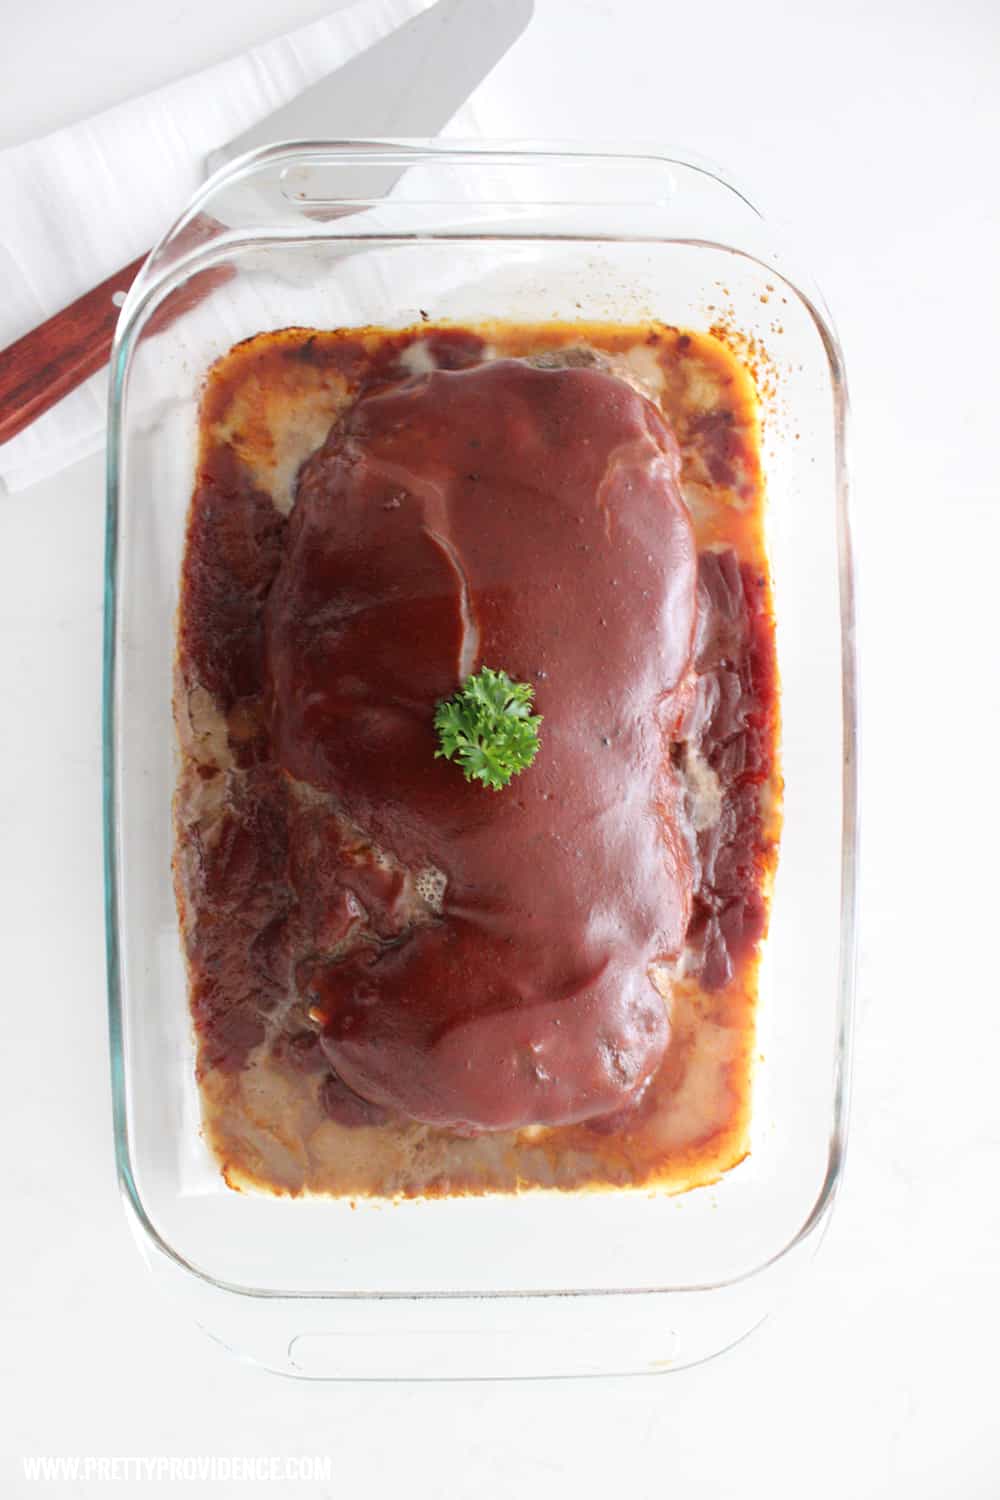 Totally obsessed with this classic meatloaf recipe! It's easy, delicious and always a crowd pleaser! 